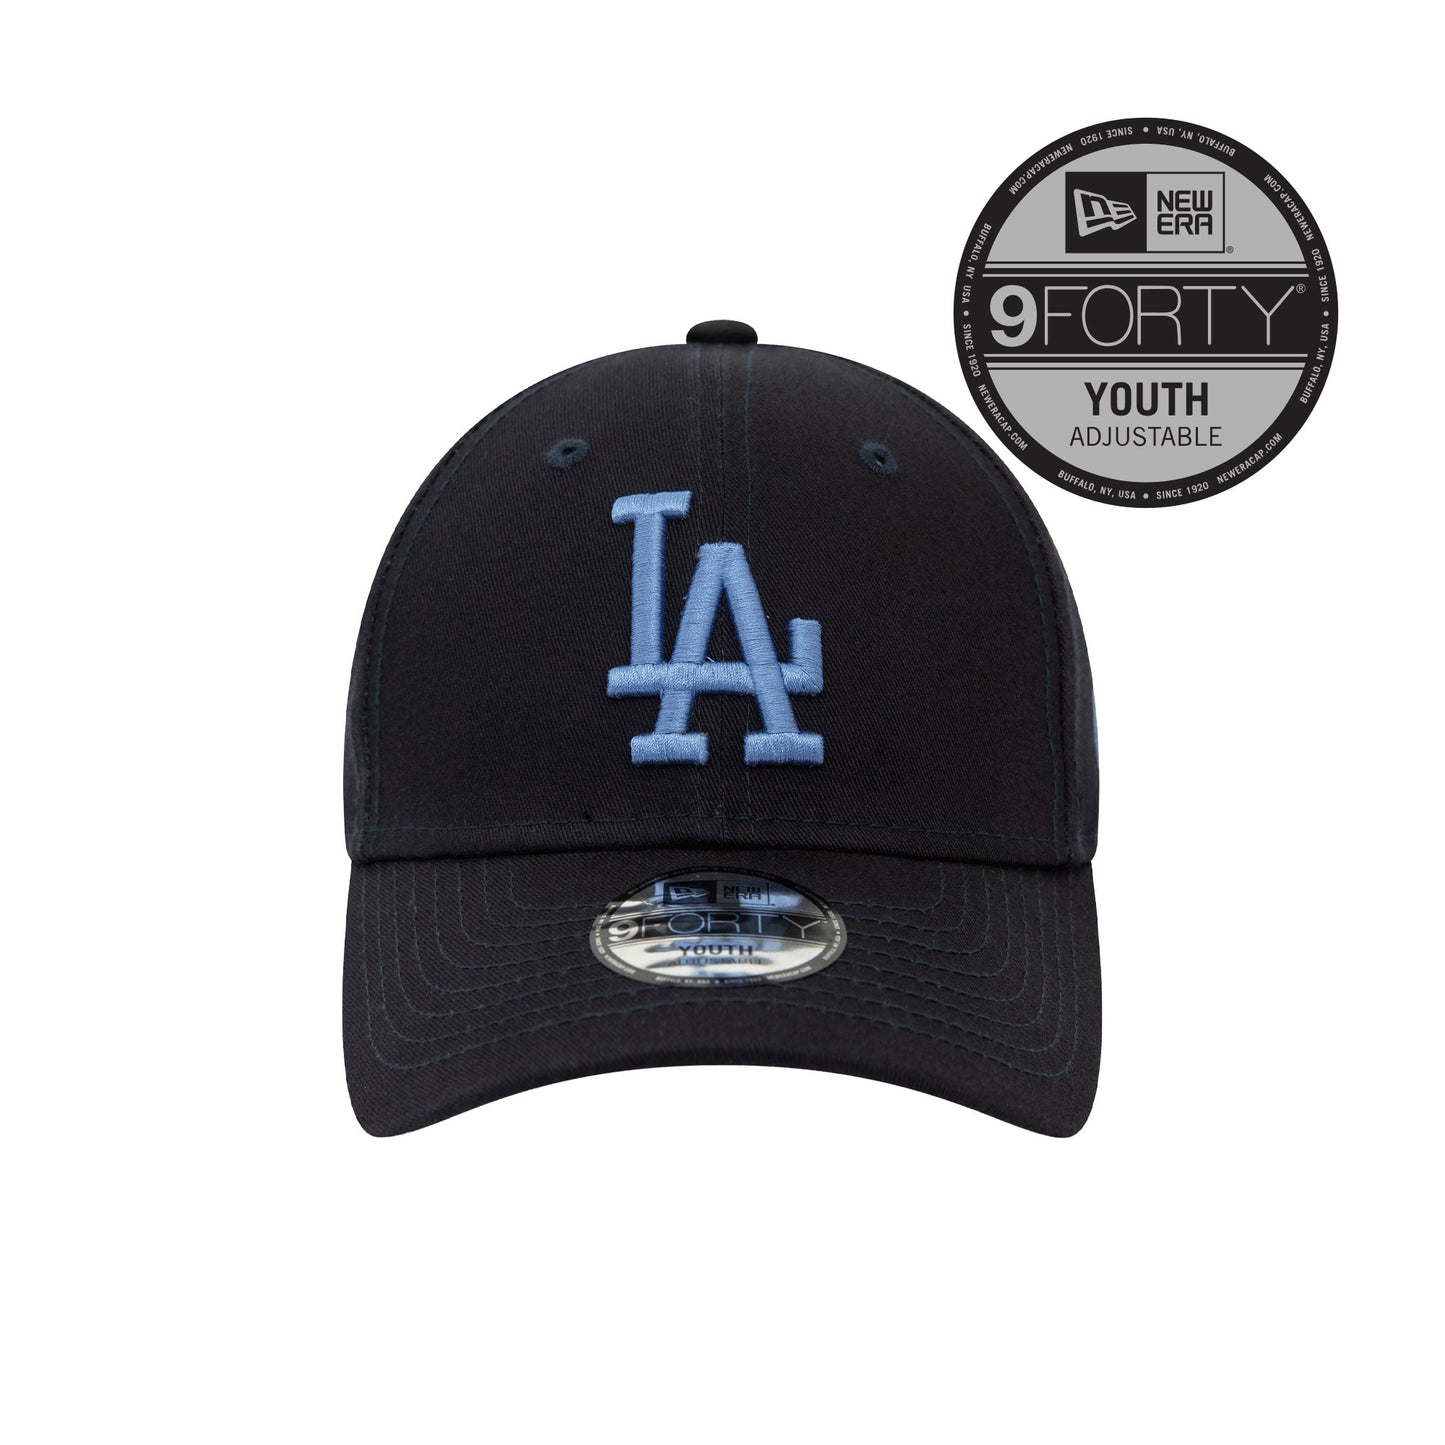 Los Angeles Dodgers New Era 9FORTY YOUTH Strap back Cap navy